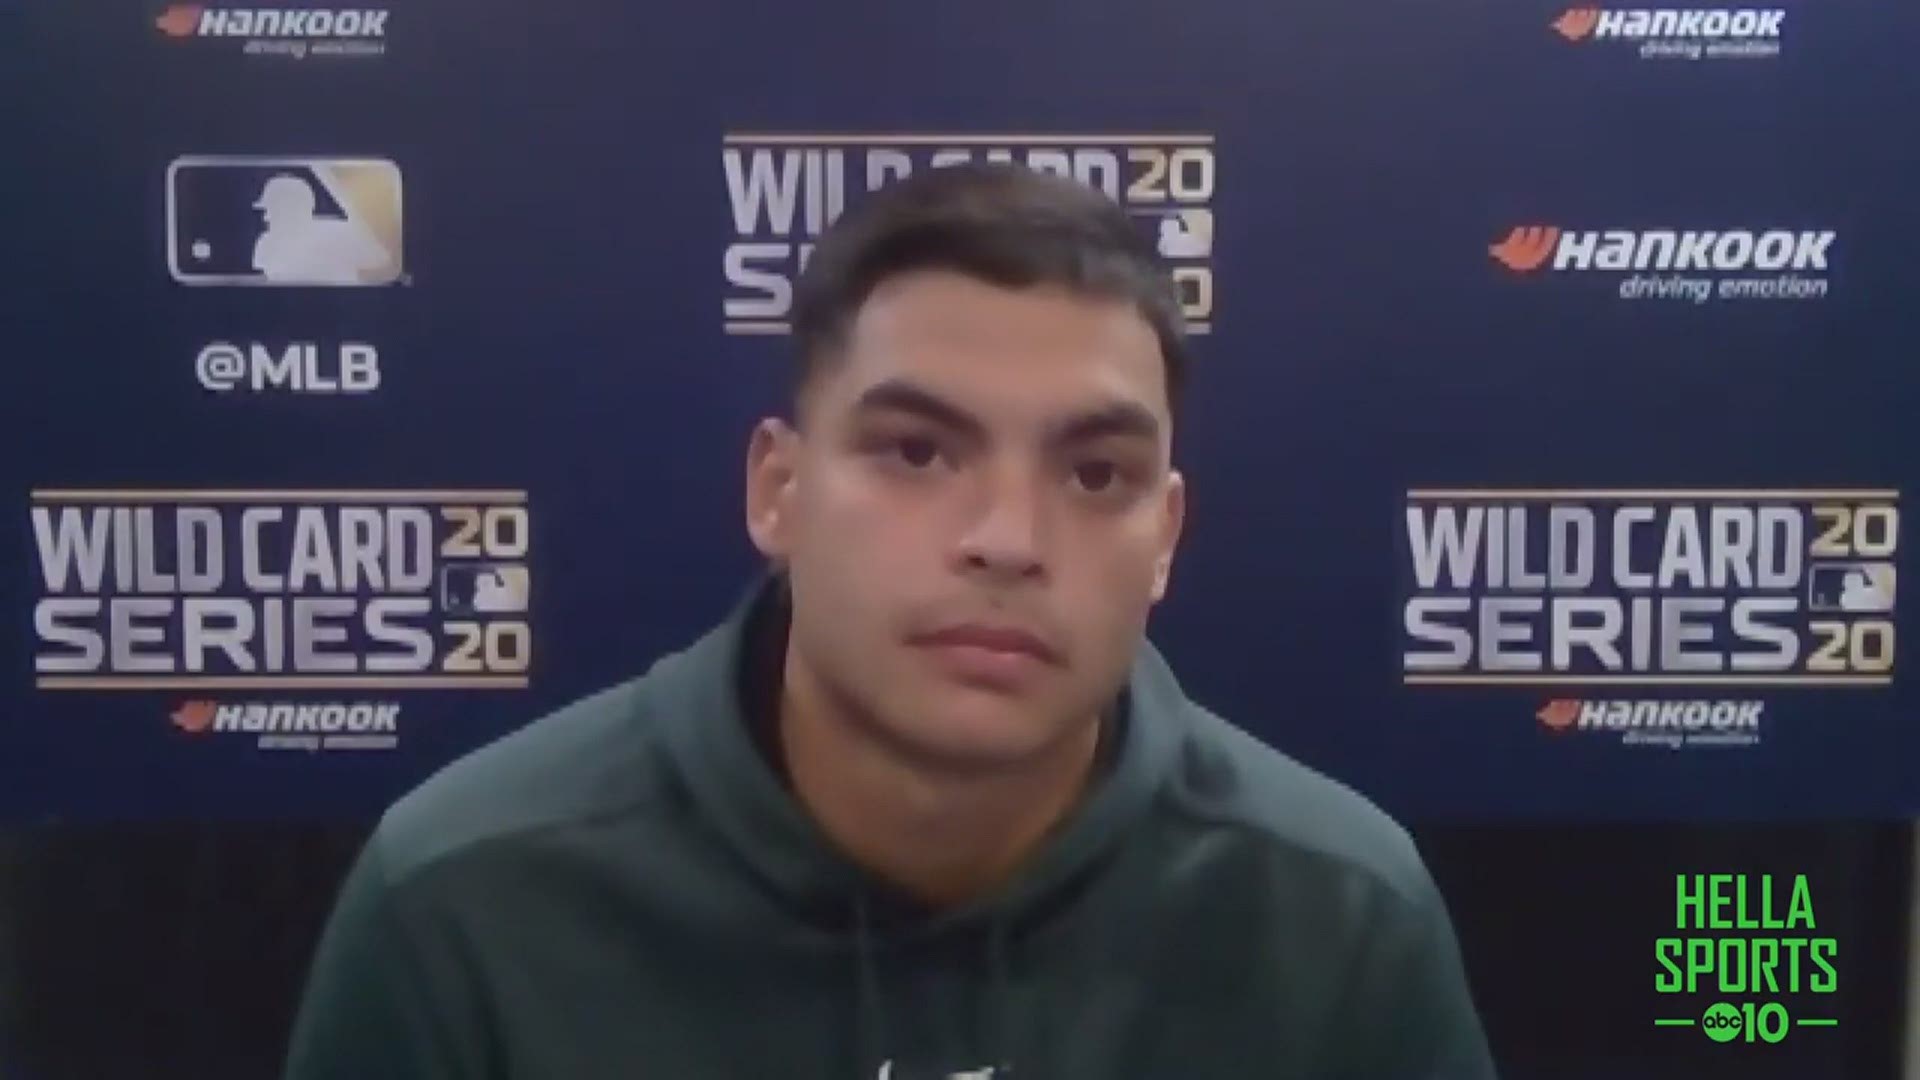 A's pitcher Jesus Luzardo discusses Oakland's 4-1 loss to the Chicago White Sox on Tuesday and his belief that they can bounce back in the Wild Card series.